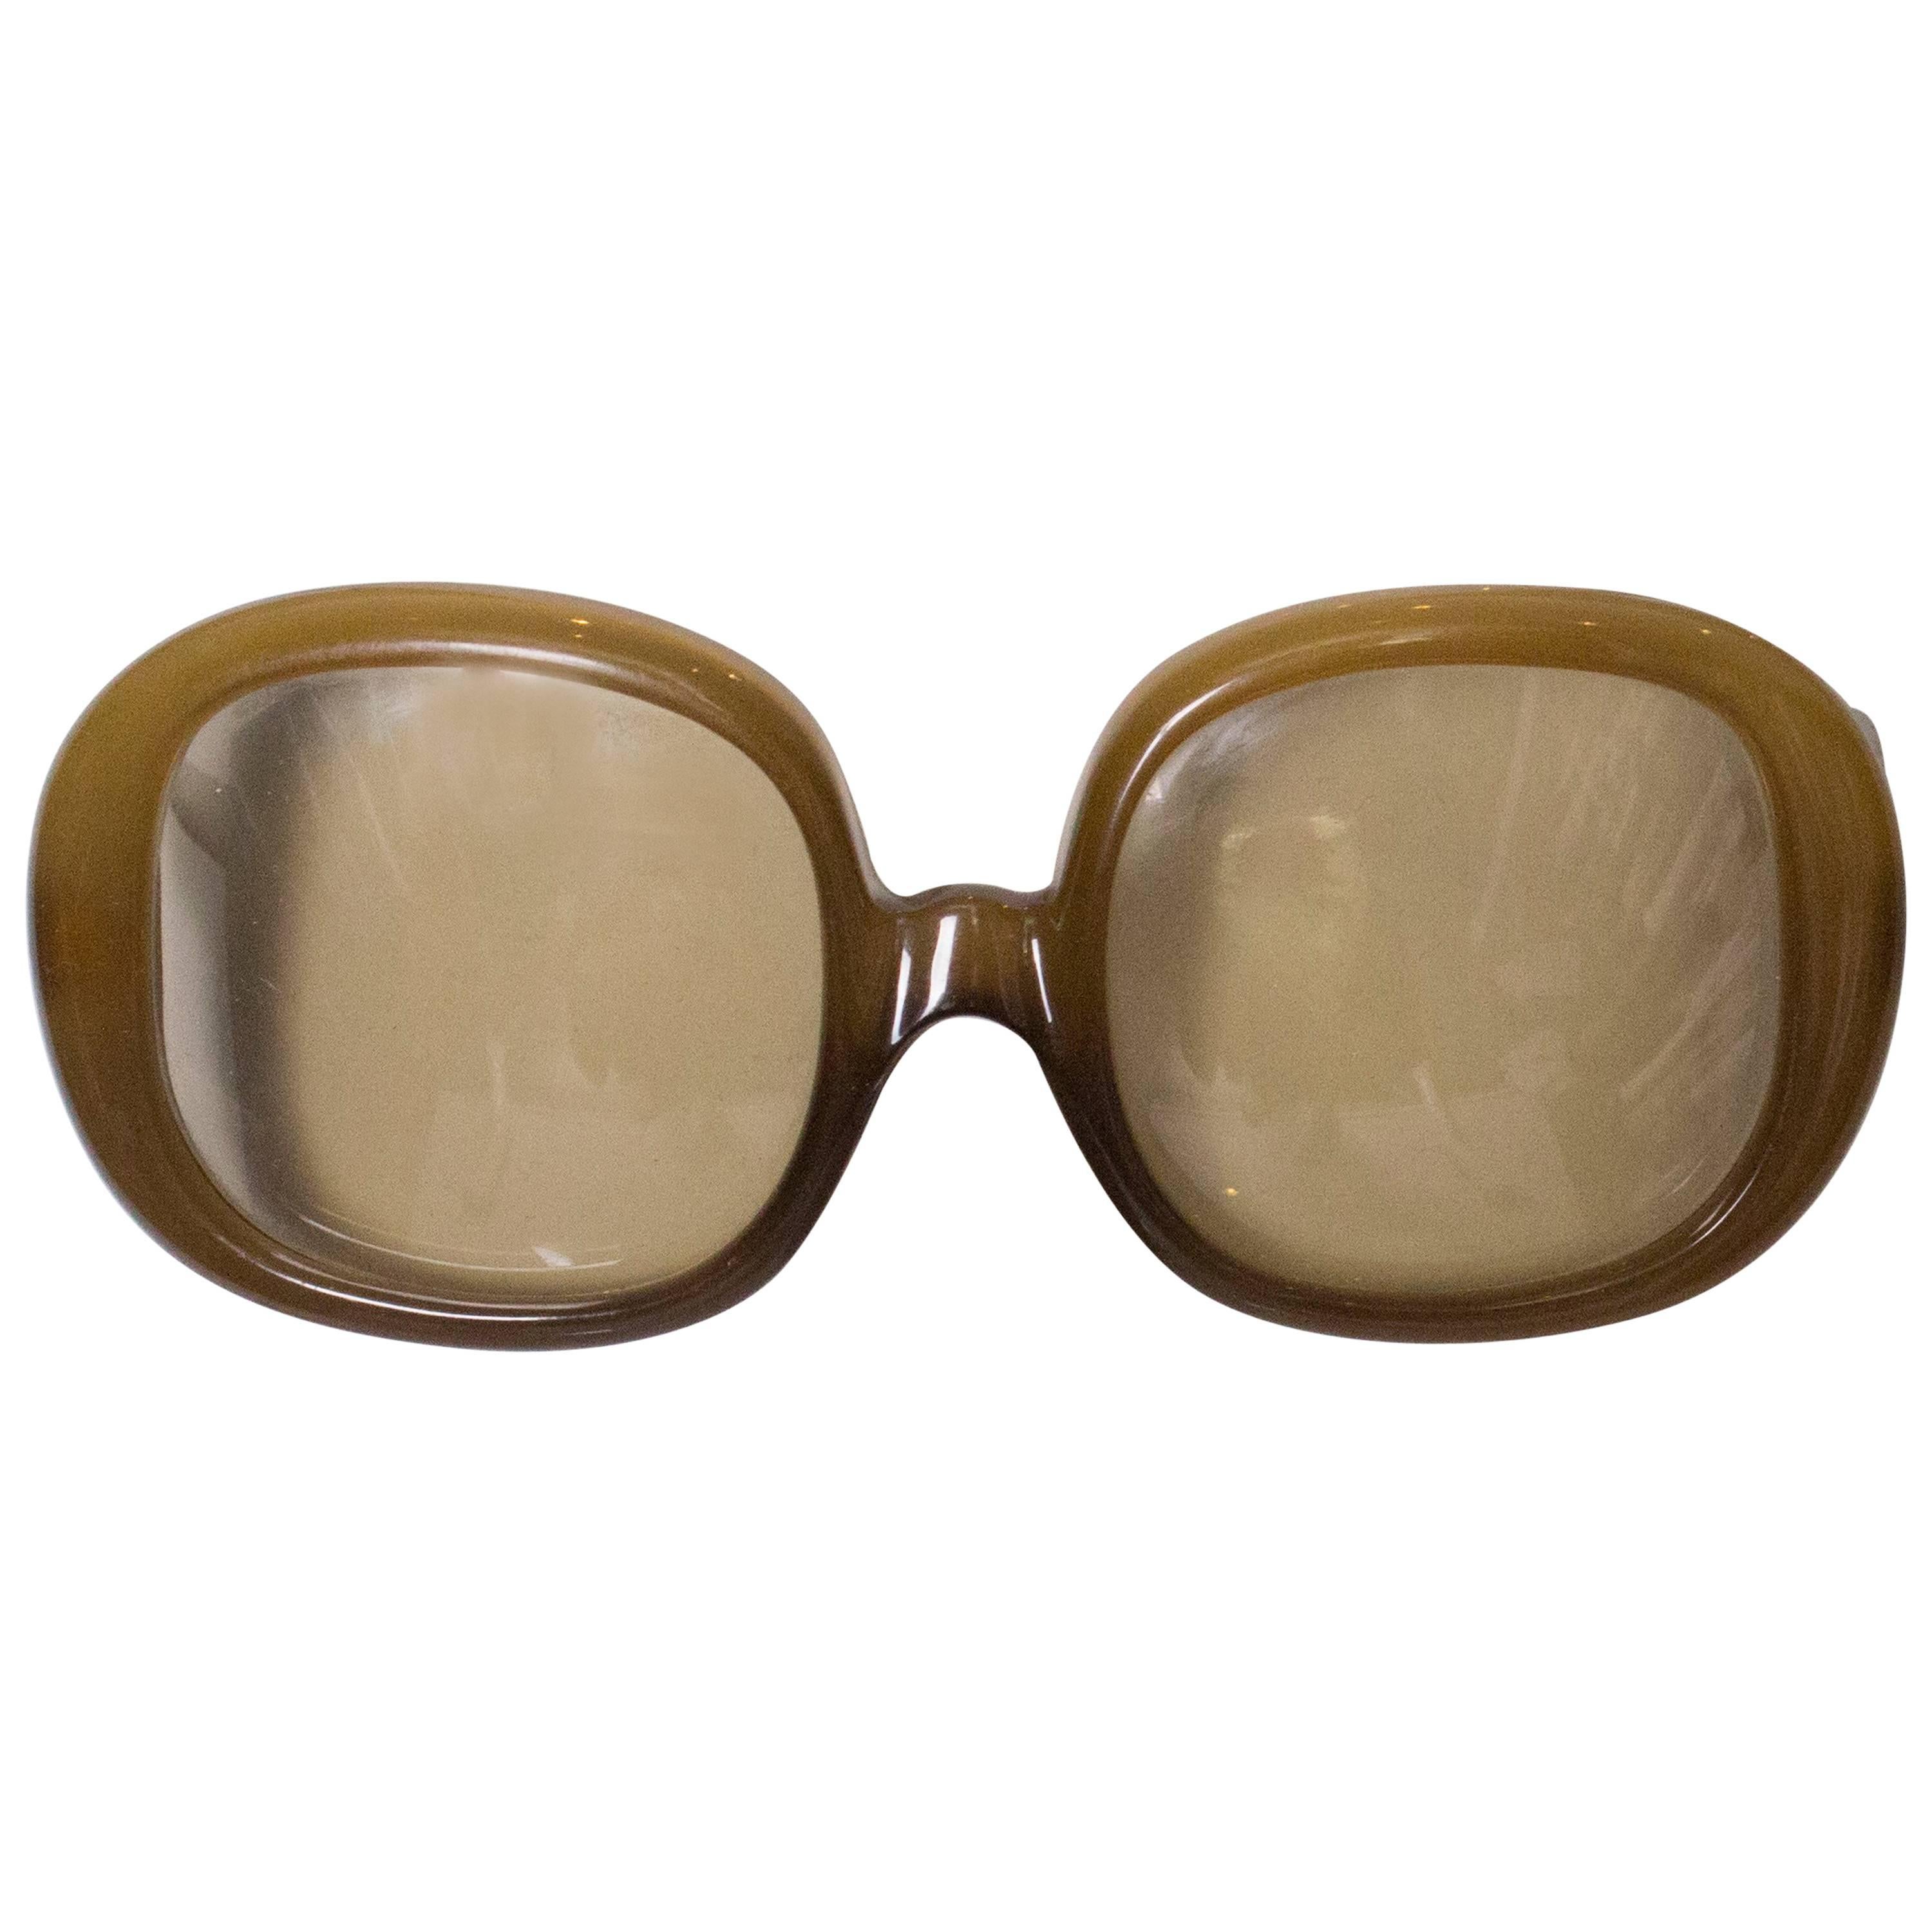 A pair of Vintage 1970s sunglasses by Christian Dior 